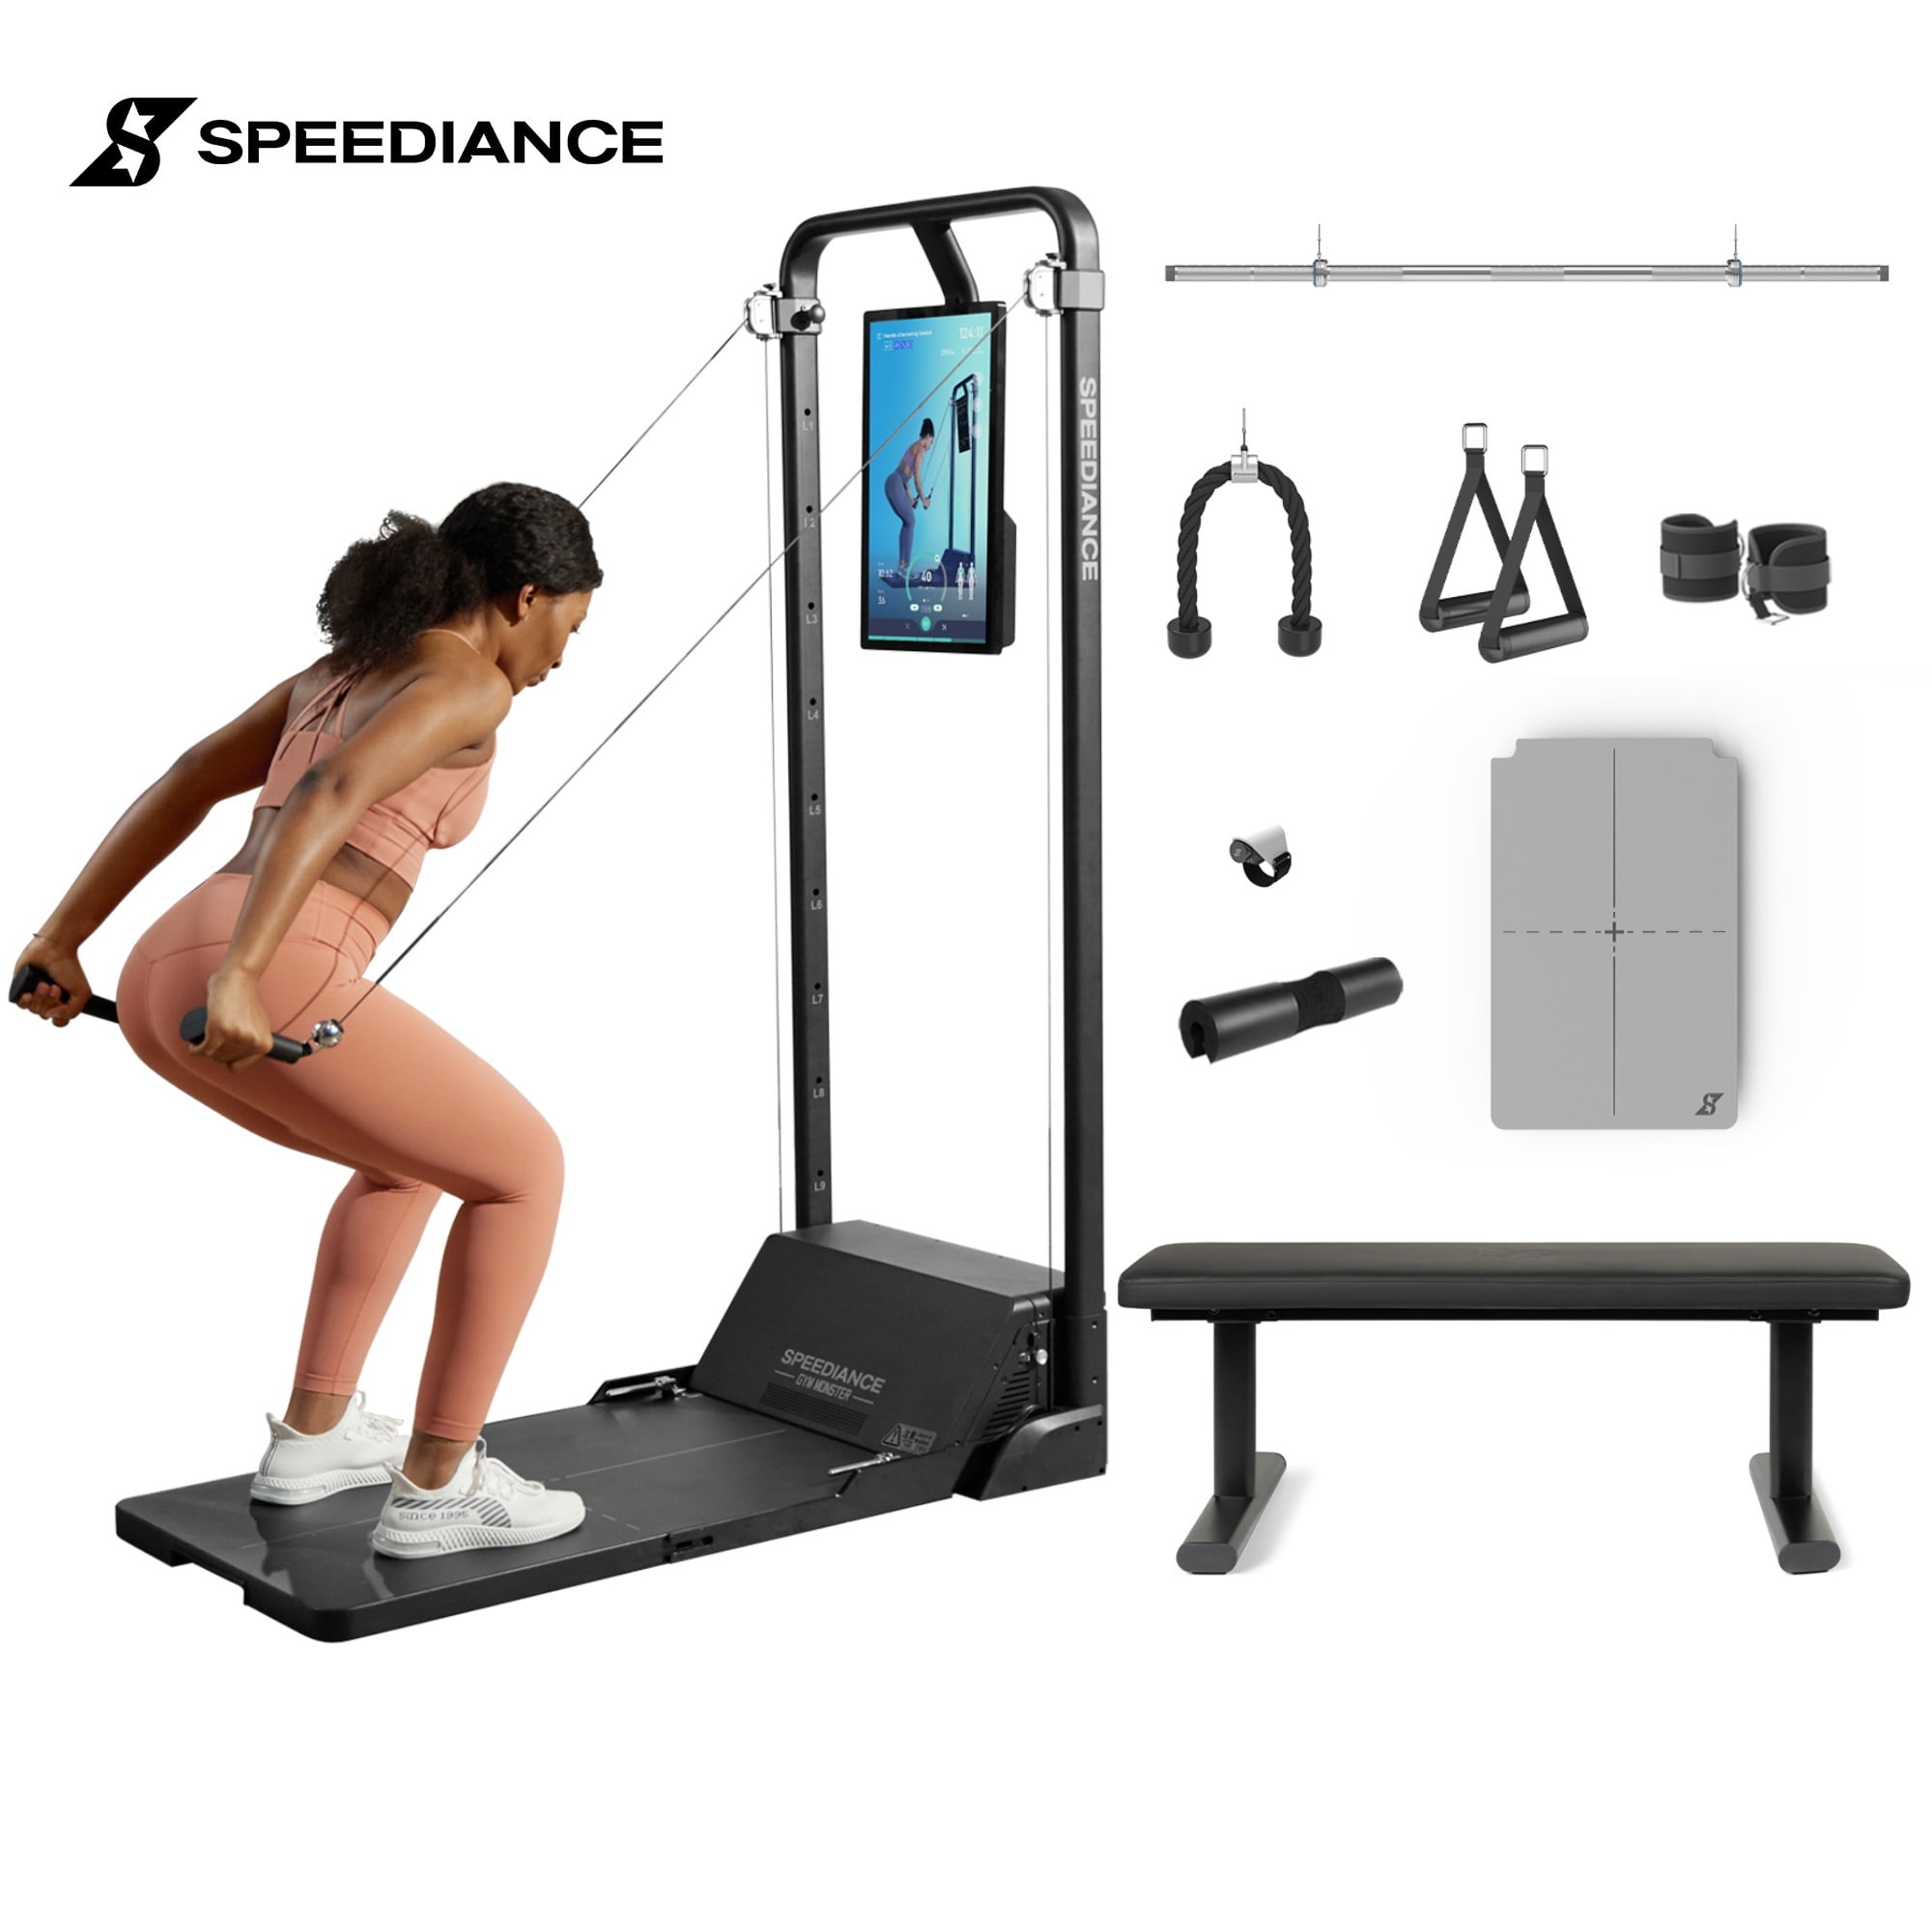 Motion Space Smart Trainer | 6 in 1 Home Gym Fitness Equipment, Adjustable  Full Body Resistance Training, Workout Equipment with APP, Multifunctional